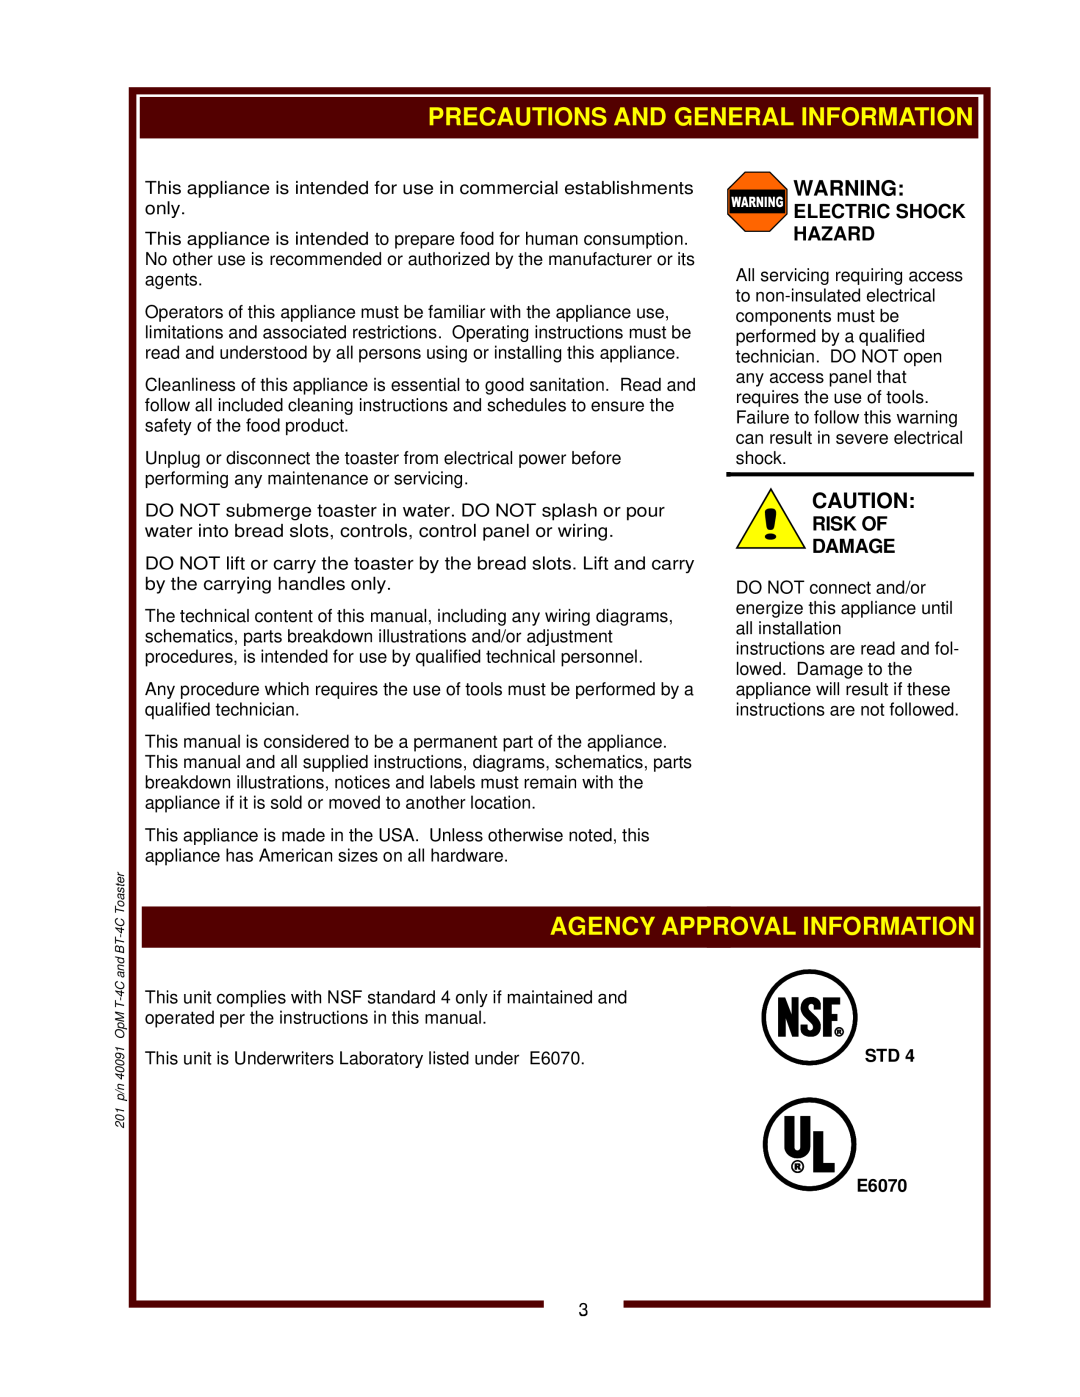 Bloomfield T-4C 15A operation manual Agency Approval Information, STD E6070, 201 p/n 40091 OpM T-4Cand BT-4CToaster 